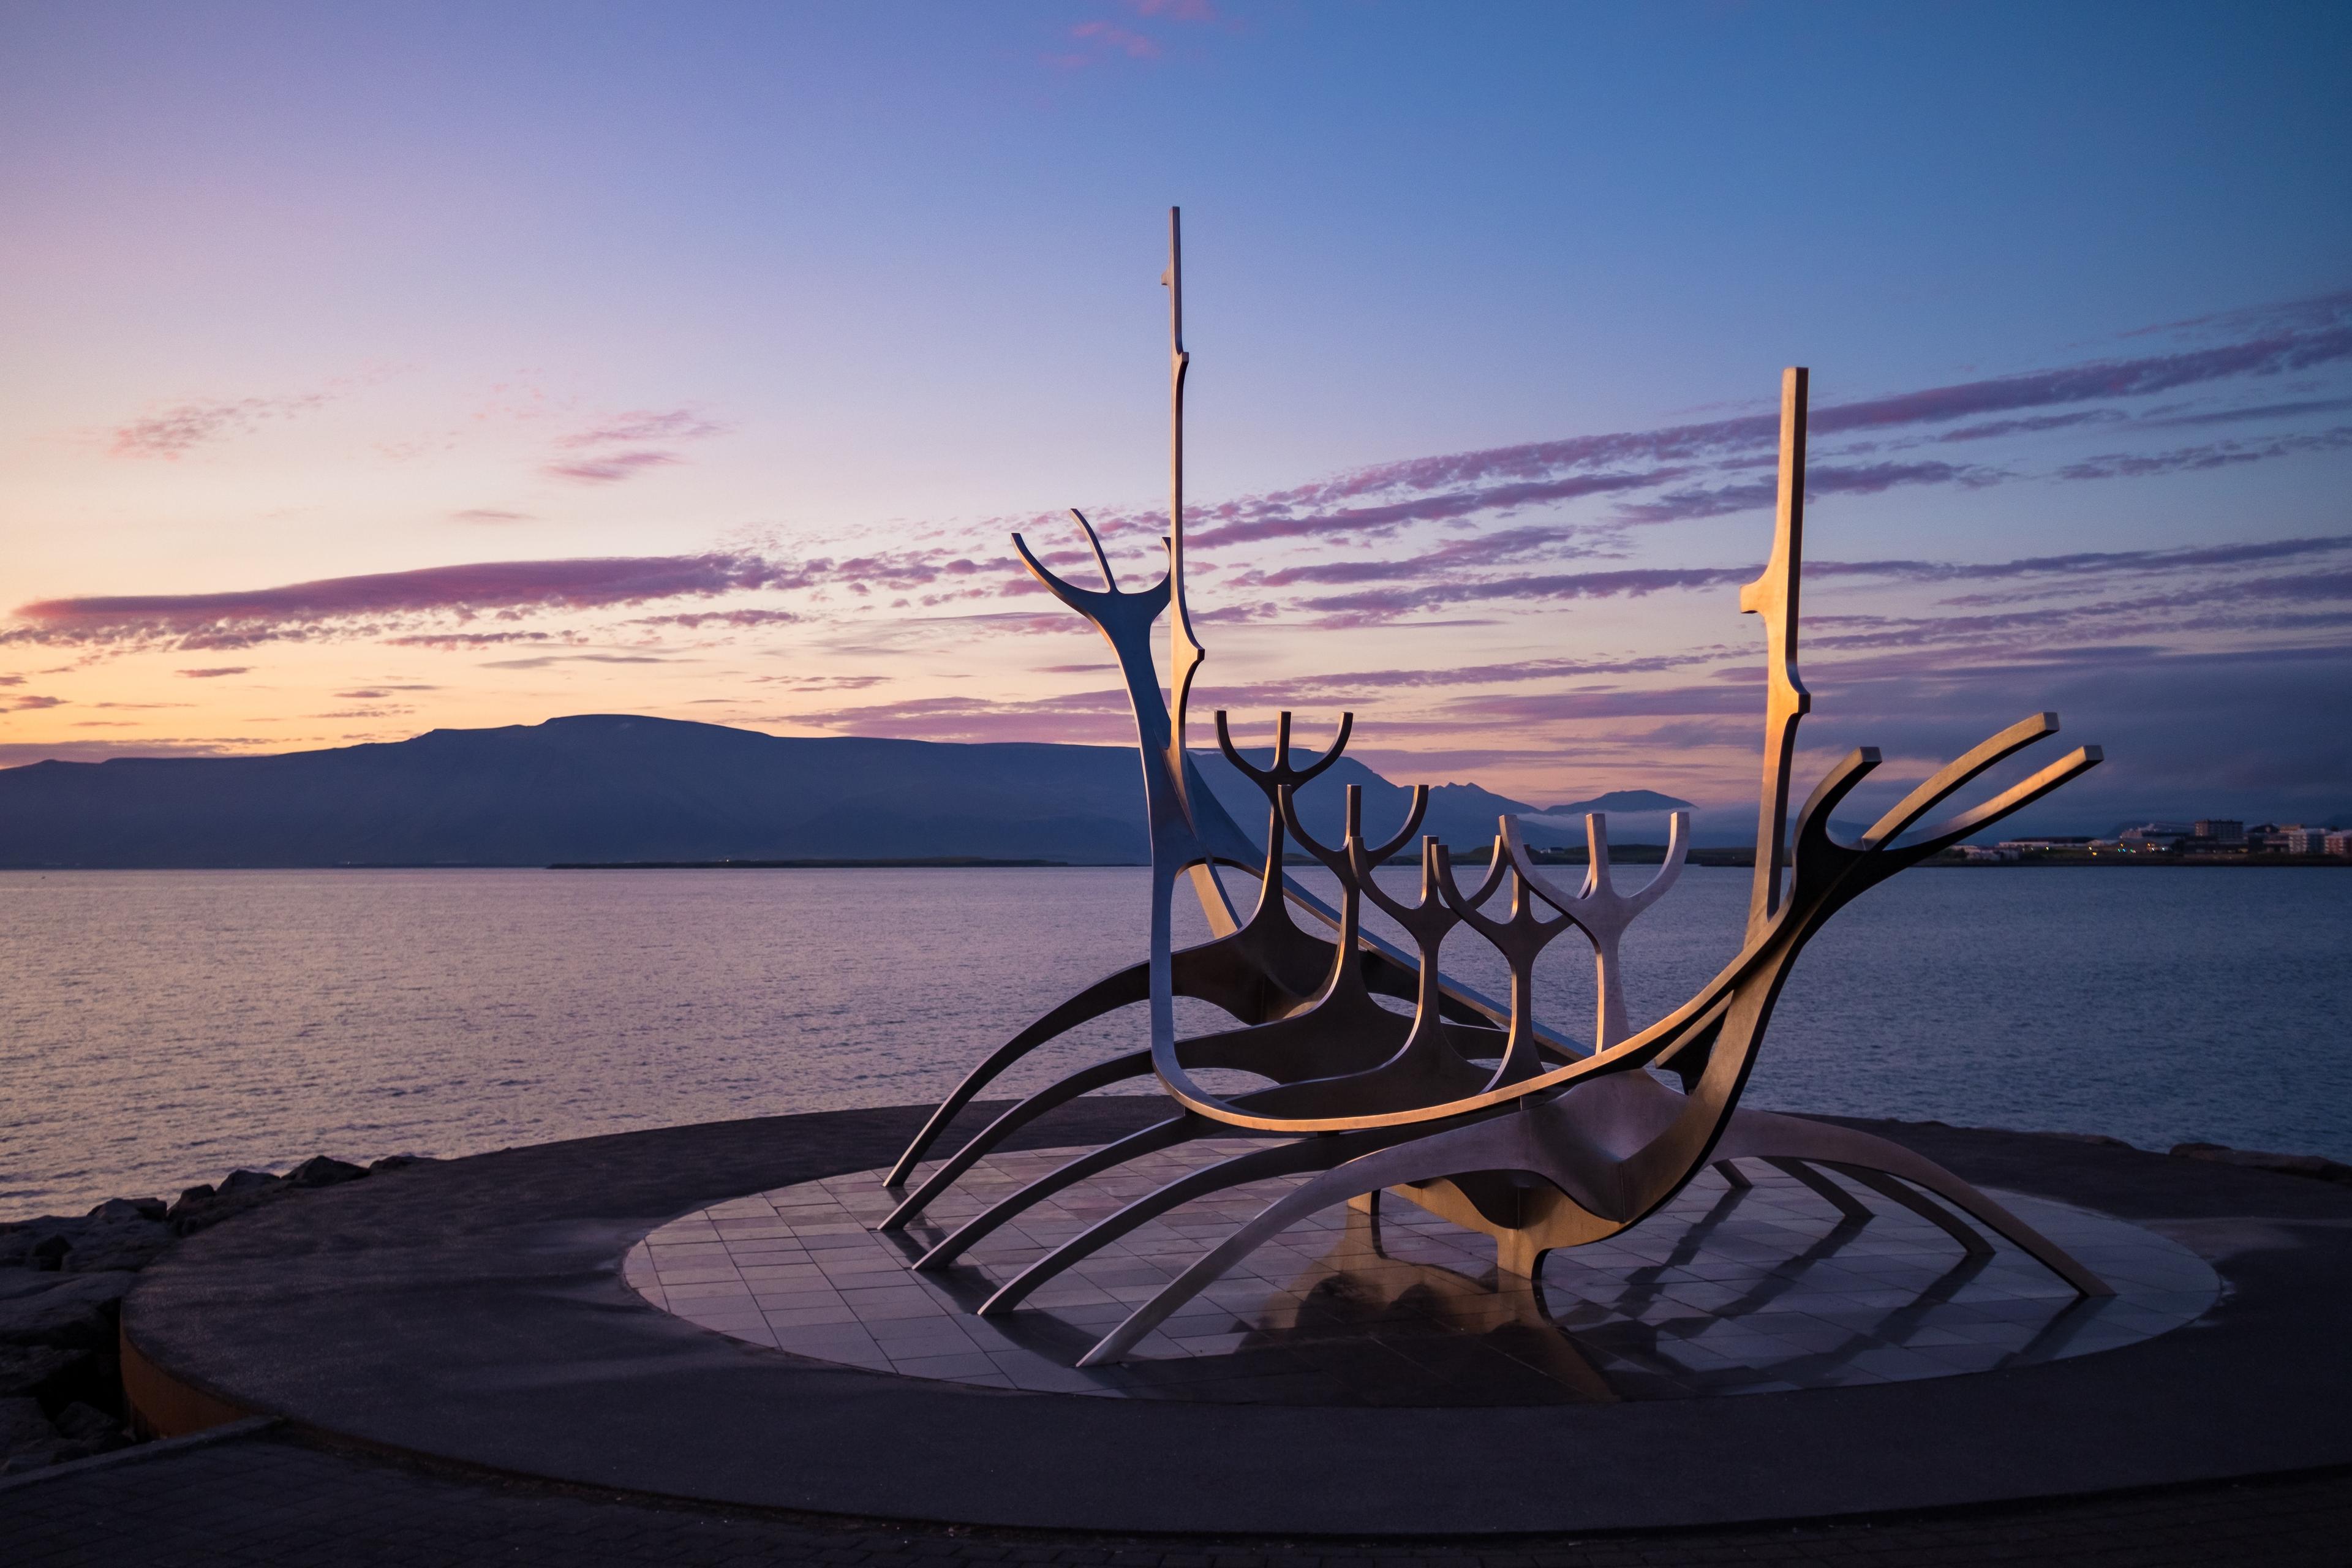 The metallic Sun Voyager sculpture bathed in the soft pink hues of sunset